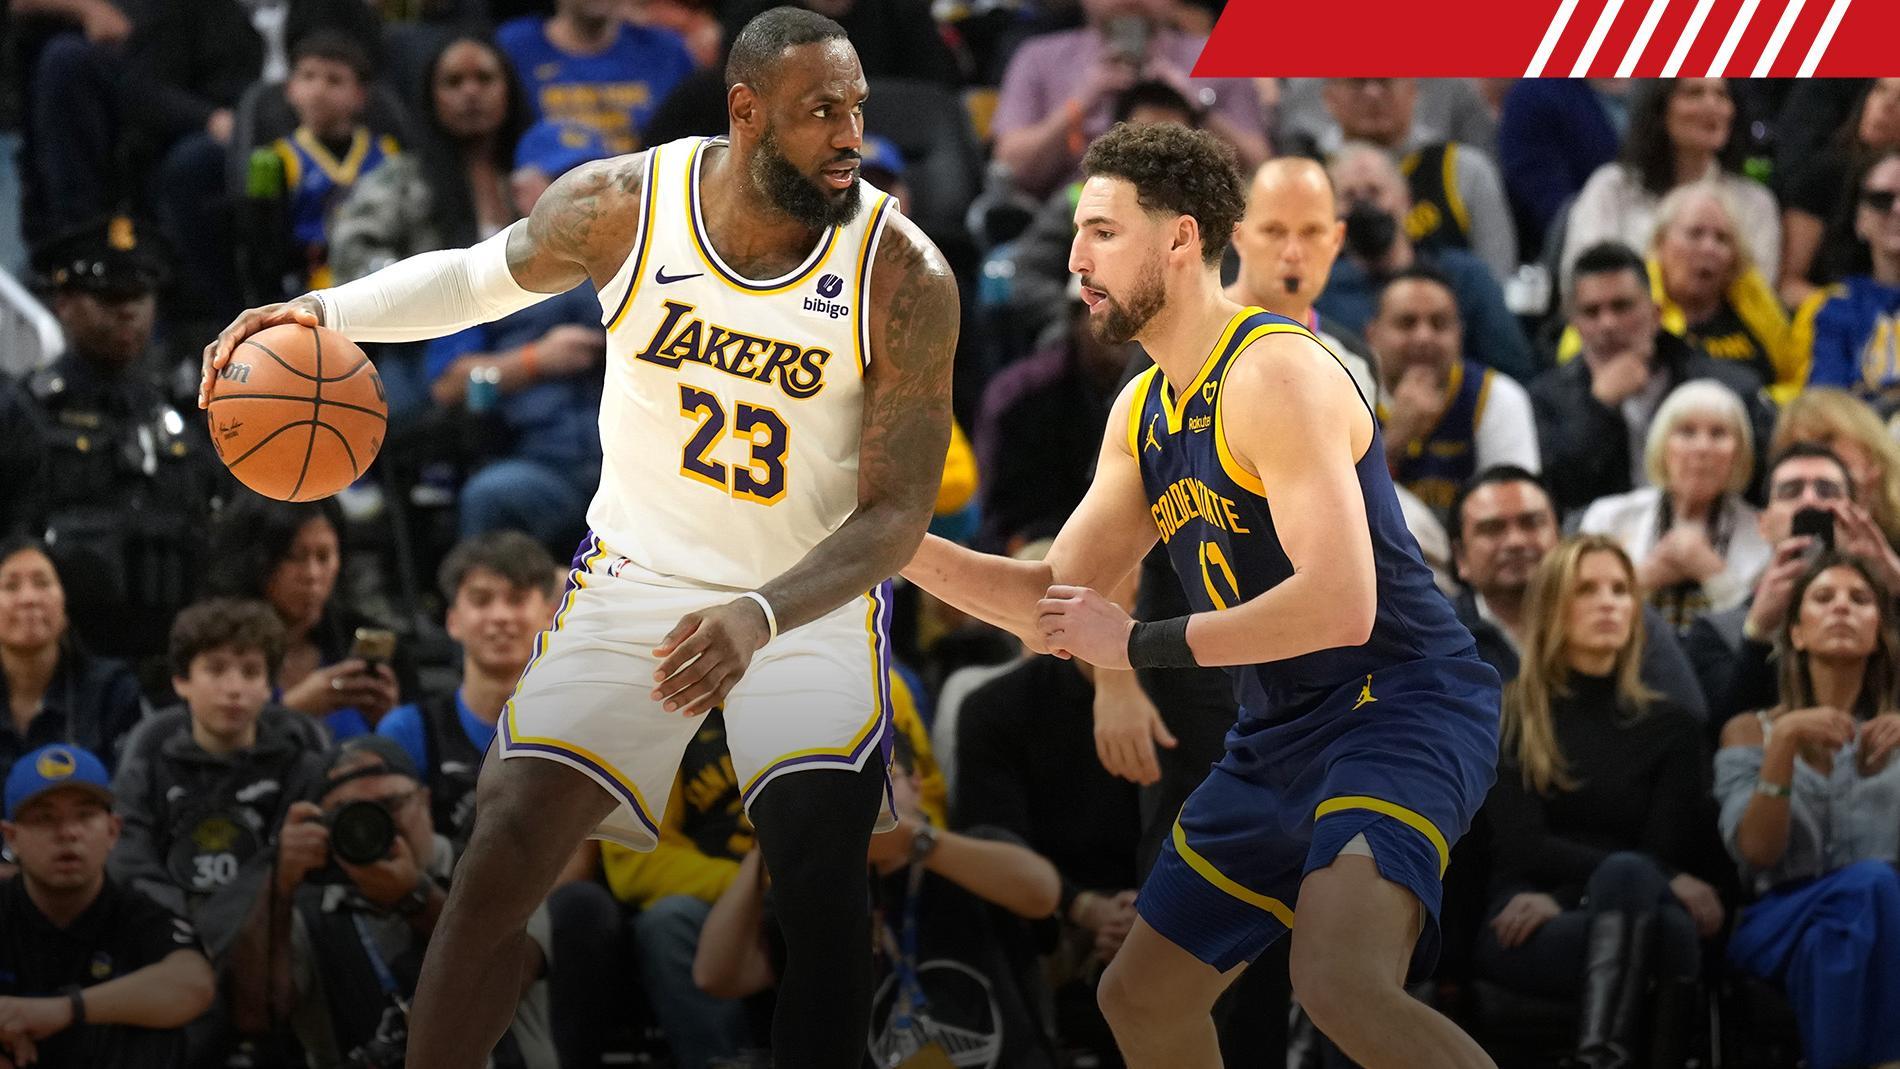 How much of a discount would LeBron need to take for Lakers to land Klay?